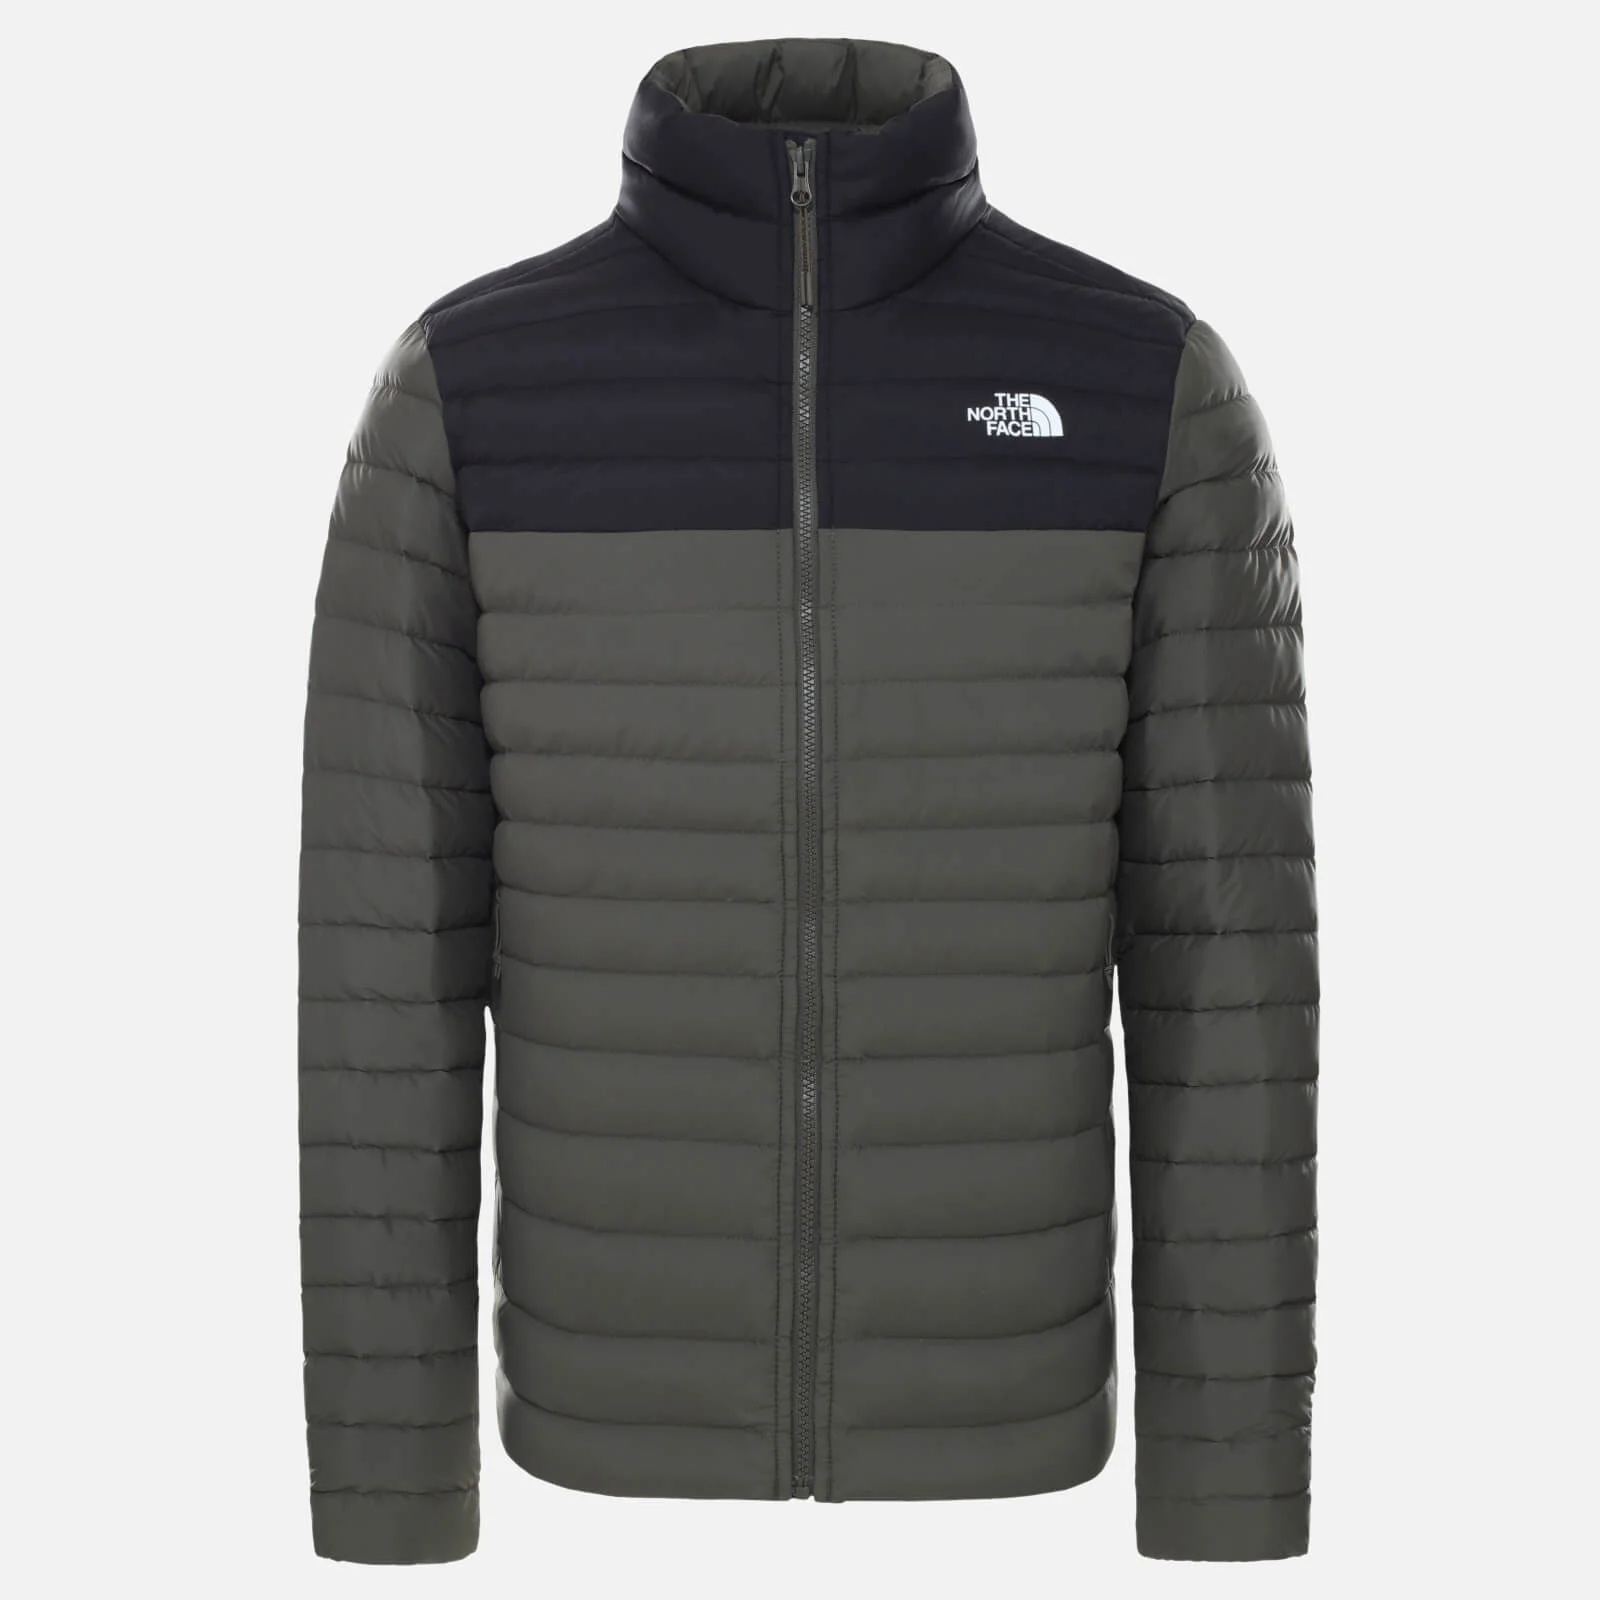 The North Face Men's Stretch Down Jacket - New Taupe Green/TNF Black Image 1